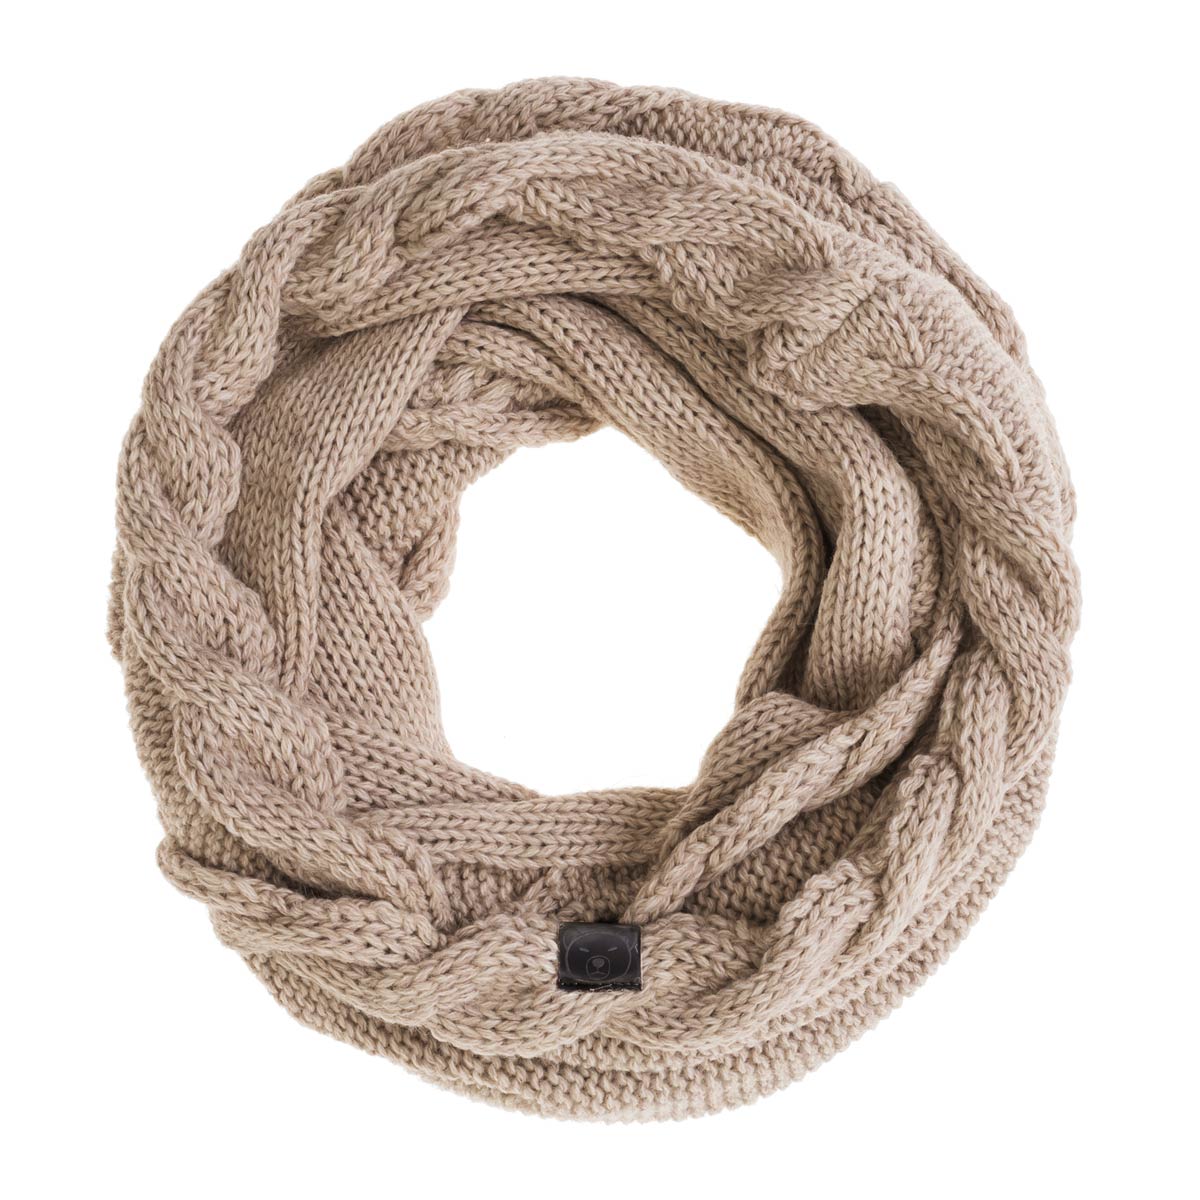 Snood-femme-tricot-beige--AT-06617_F12-1--